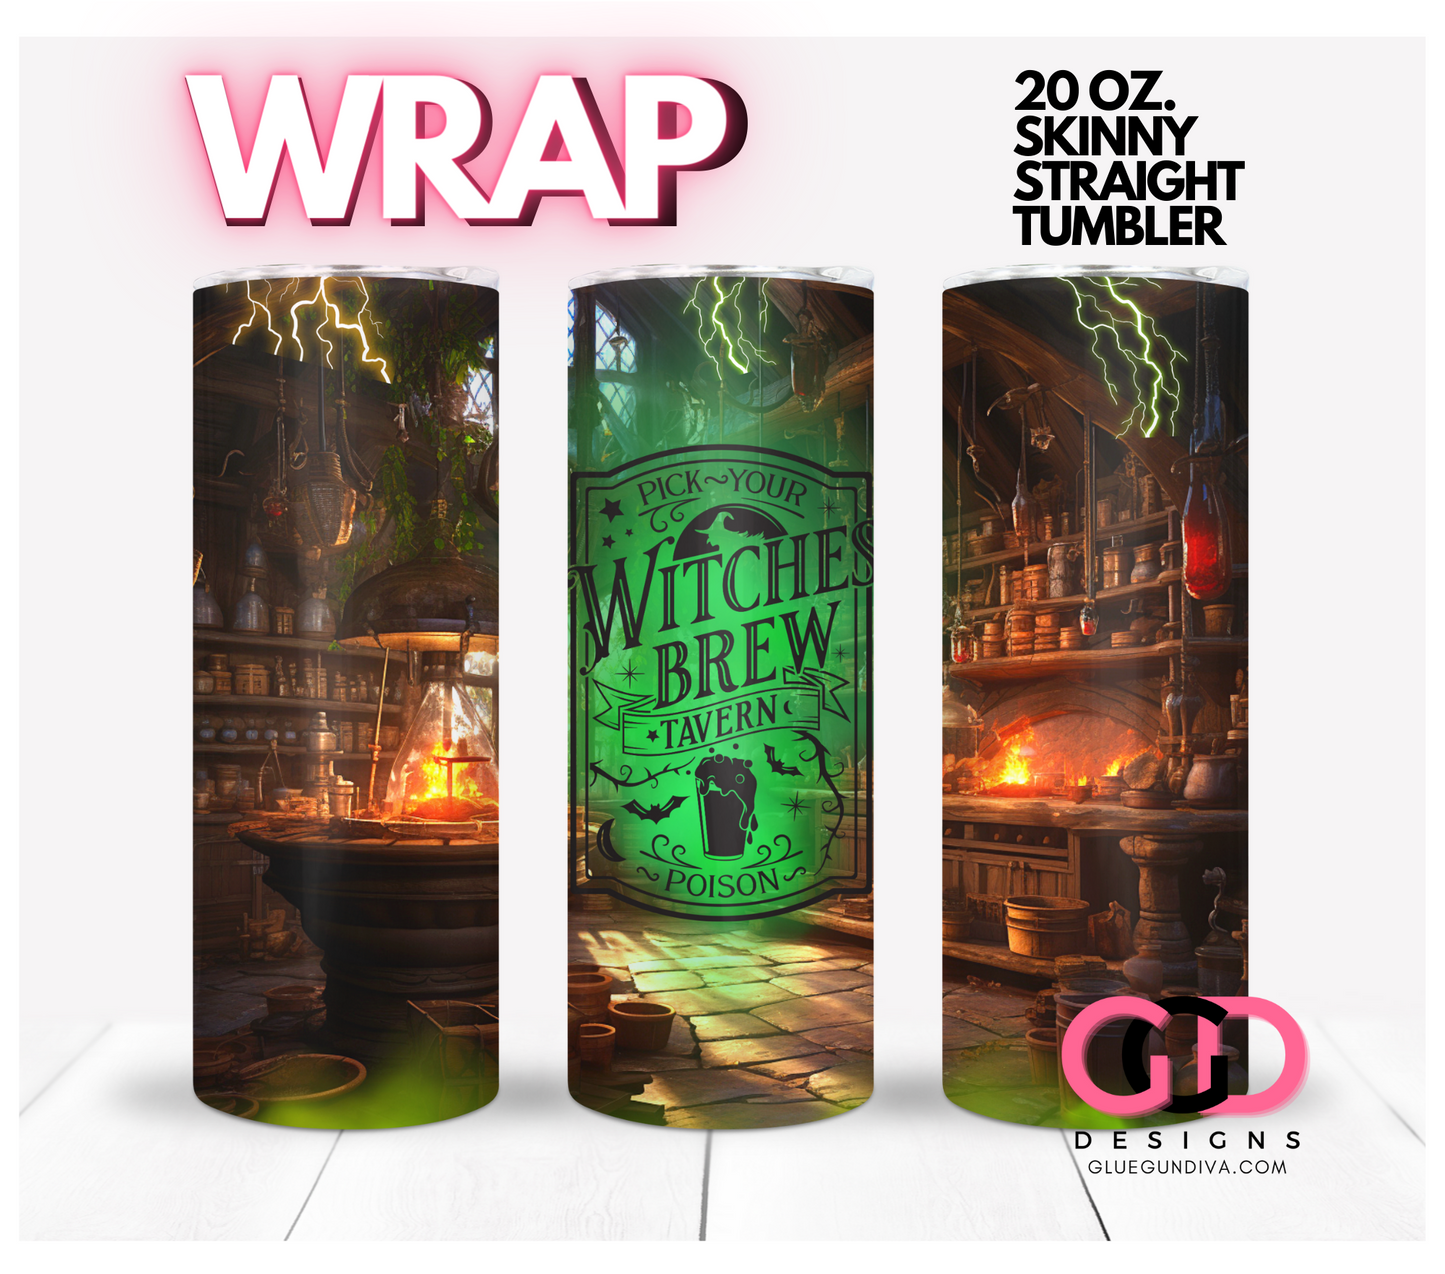 Halloween Bottle Labels- 4 Digital Wrap Images for 20 0z skinny straight tumblers